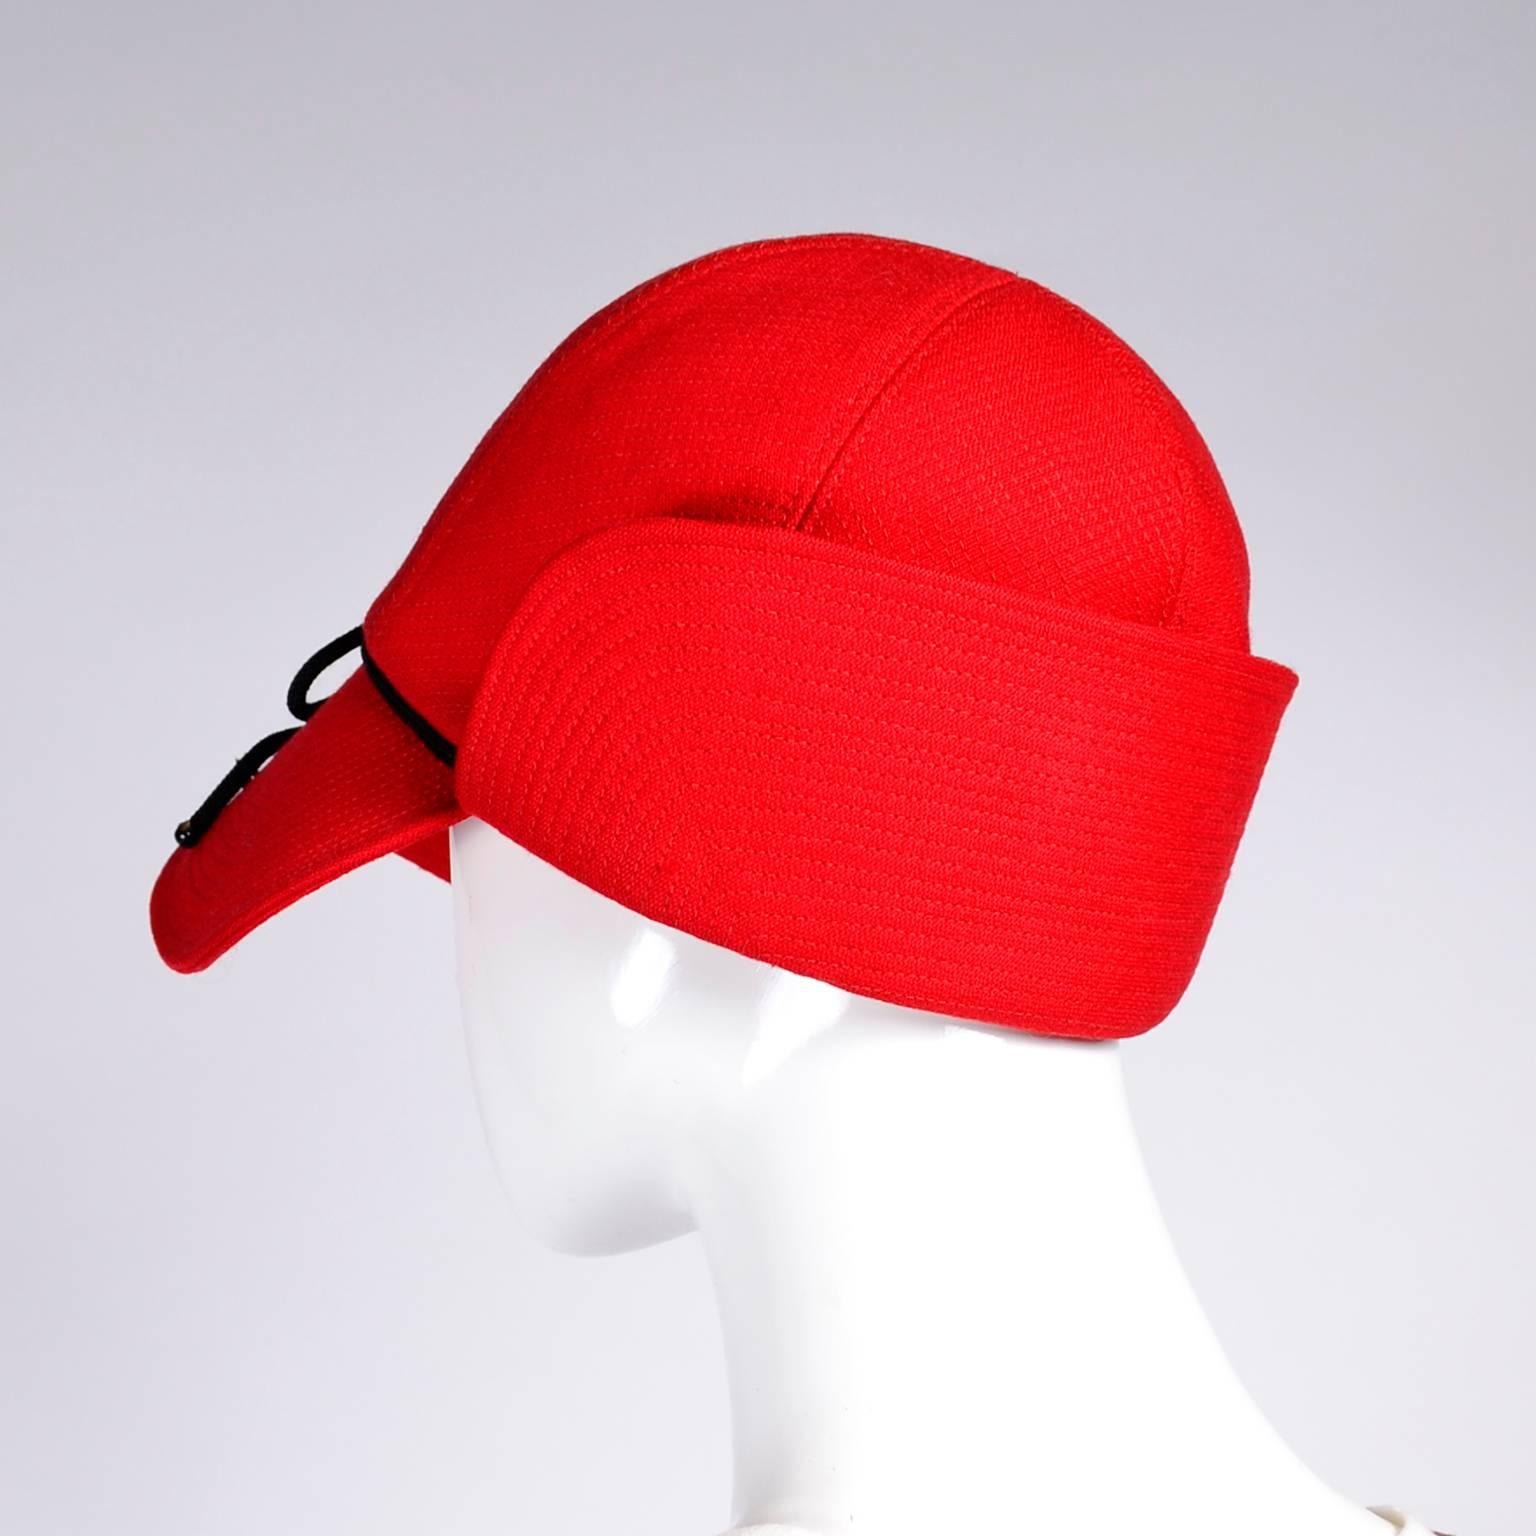 This is a wonderful vintage YSL red flap cap with top stitching and black trim. The hat measures 22” in circumference on the inside rim and is labeled a size small. This hat is lined in red satin and is an unusual style - similar to a dear stalker